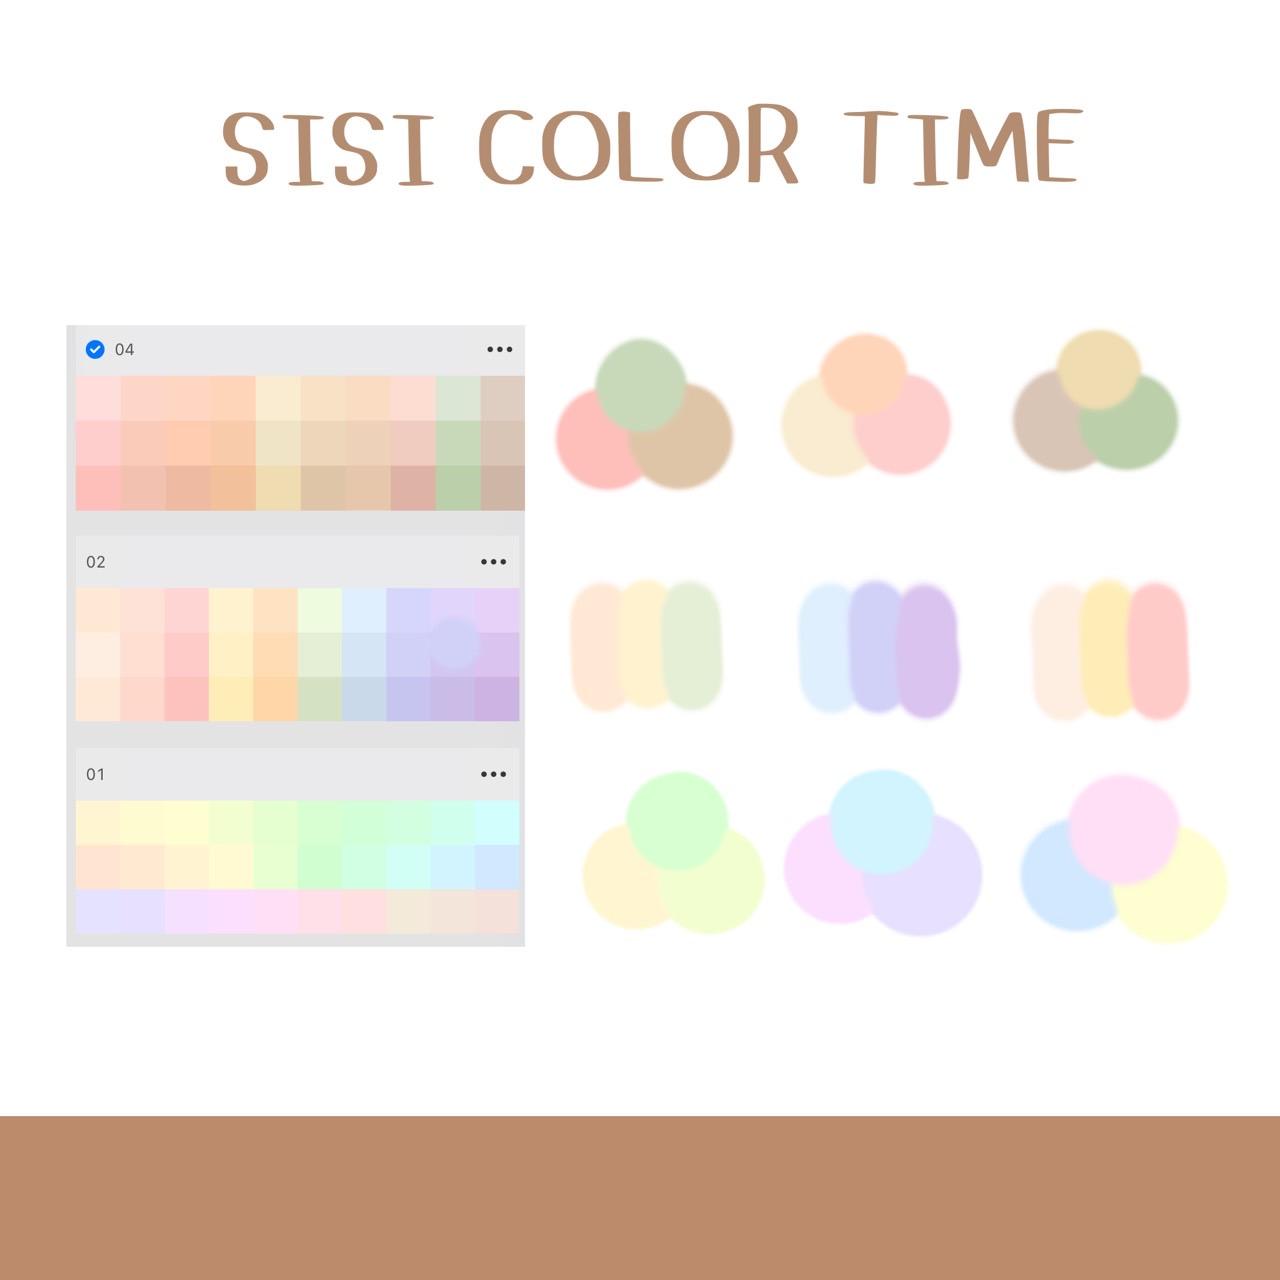 SISI COLOR TIME